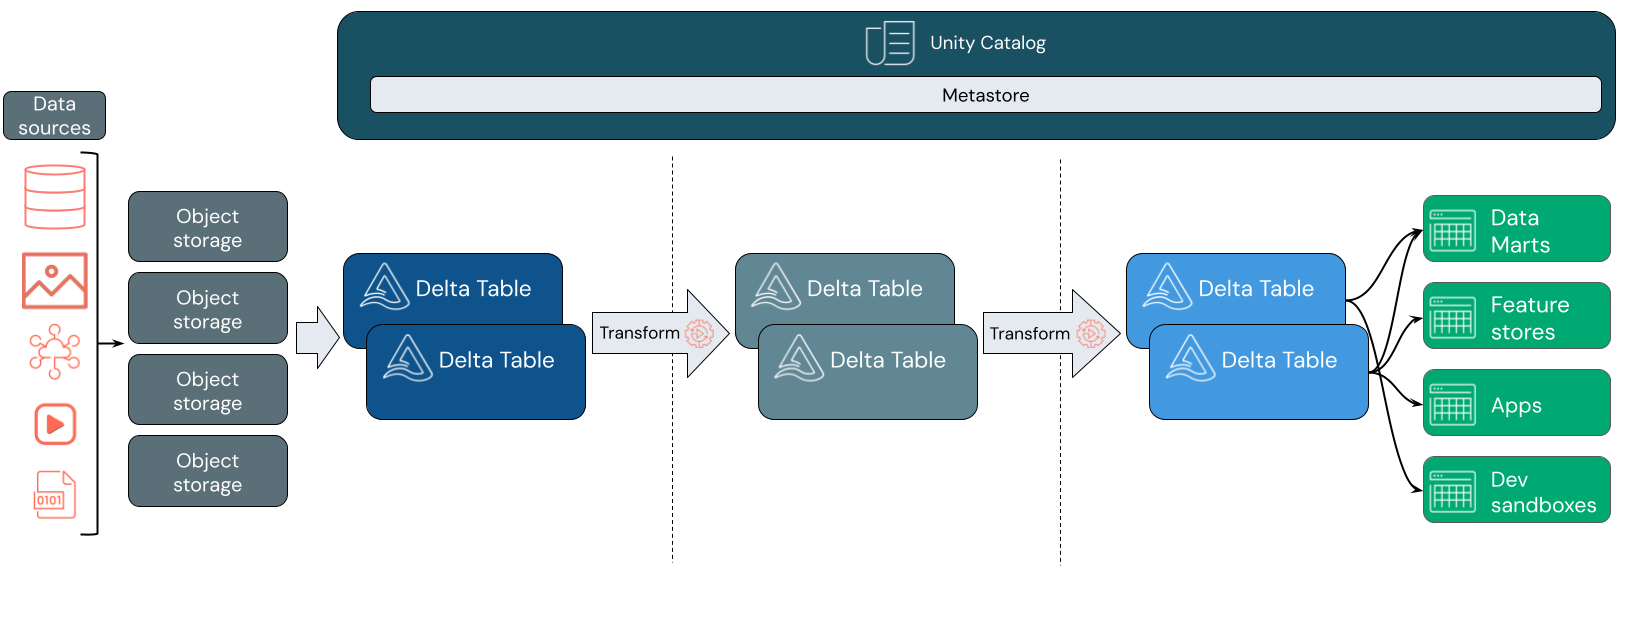 A diagram of the lakehouse architecture using Unity Catalog and delta tables.